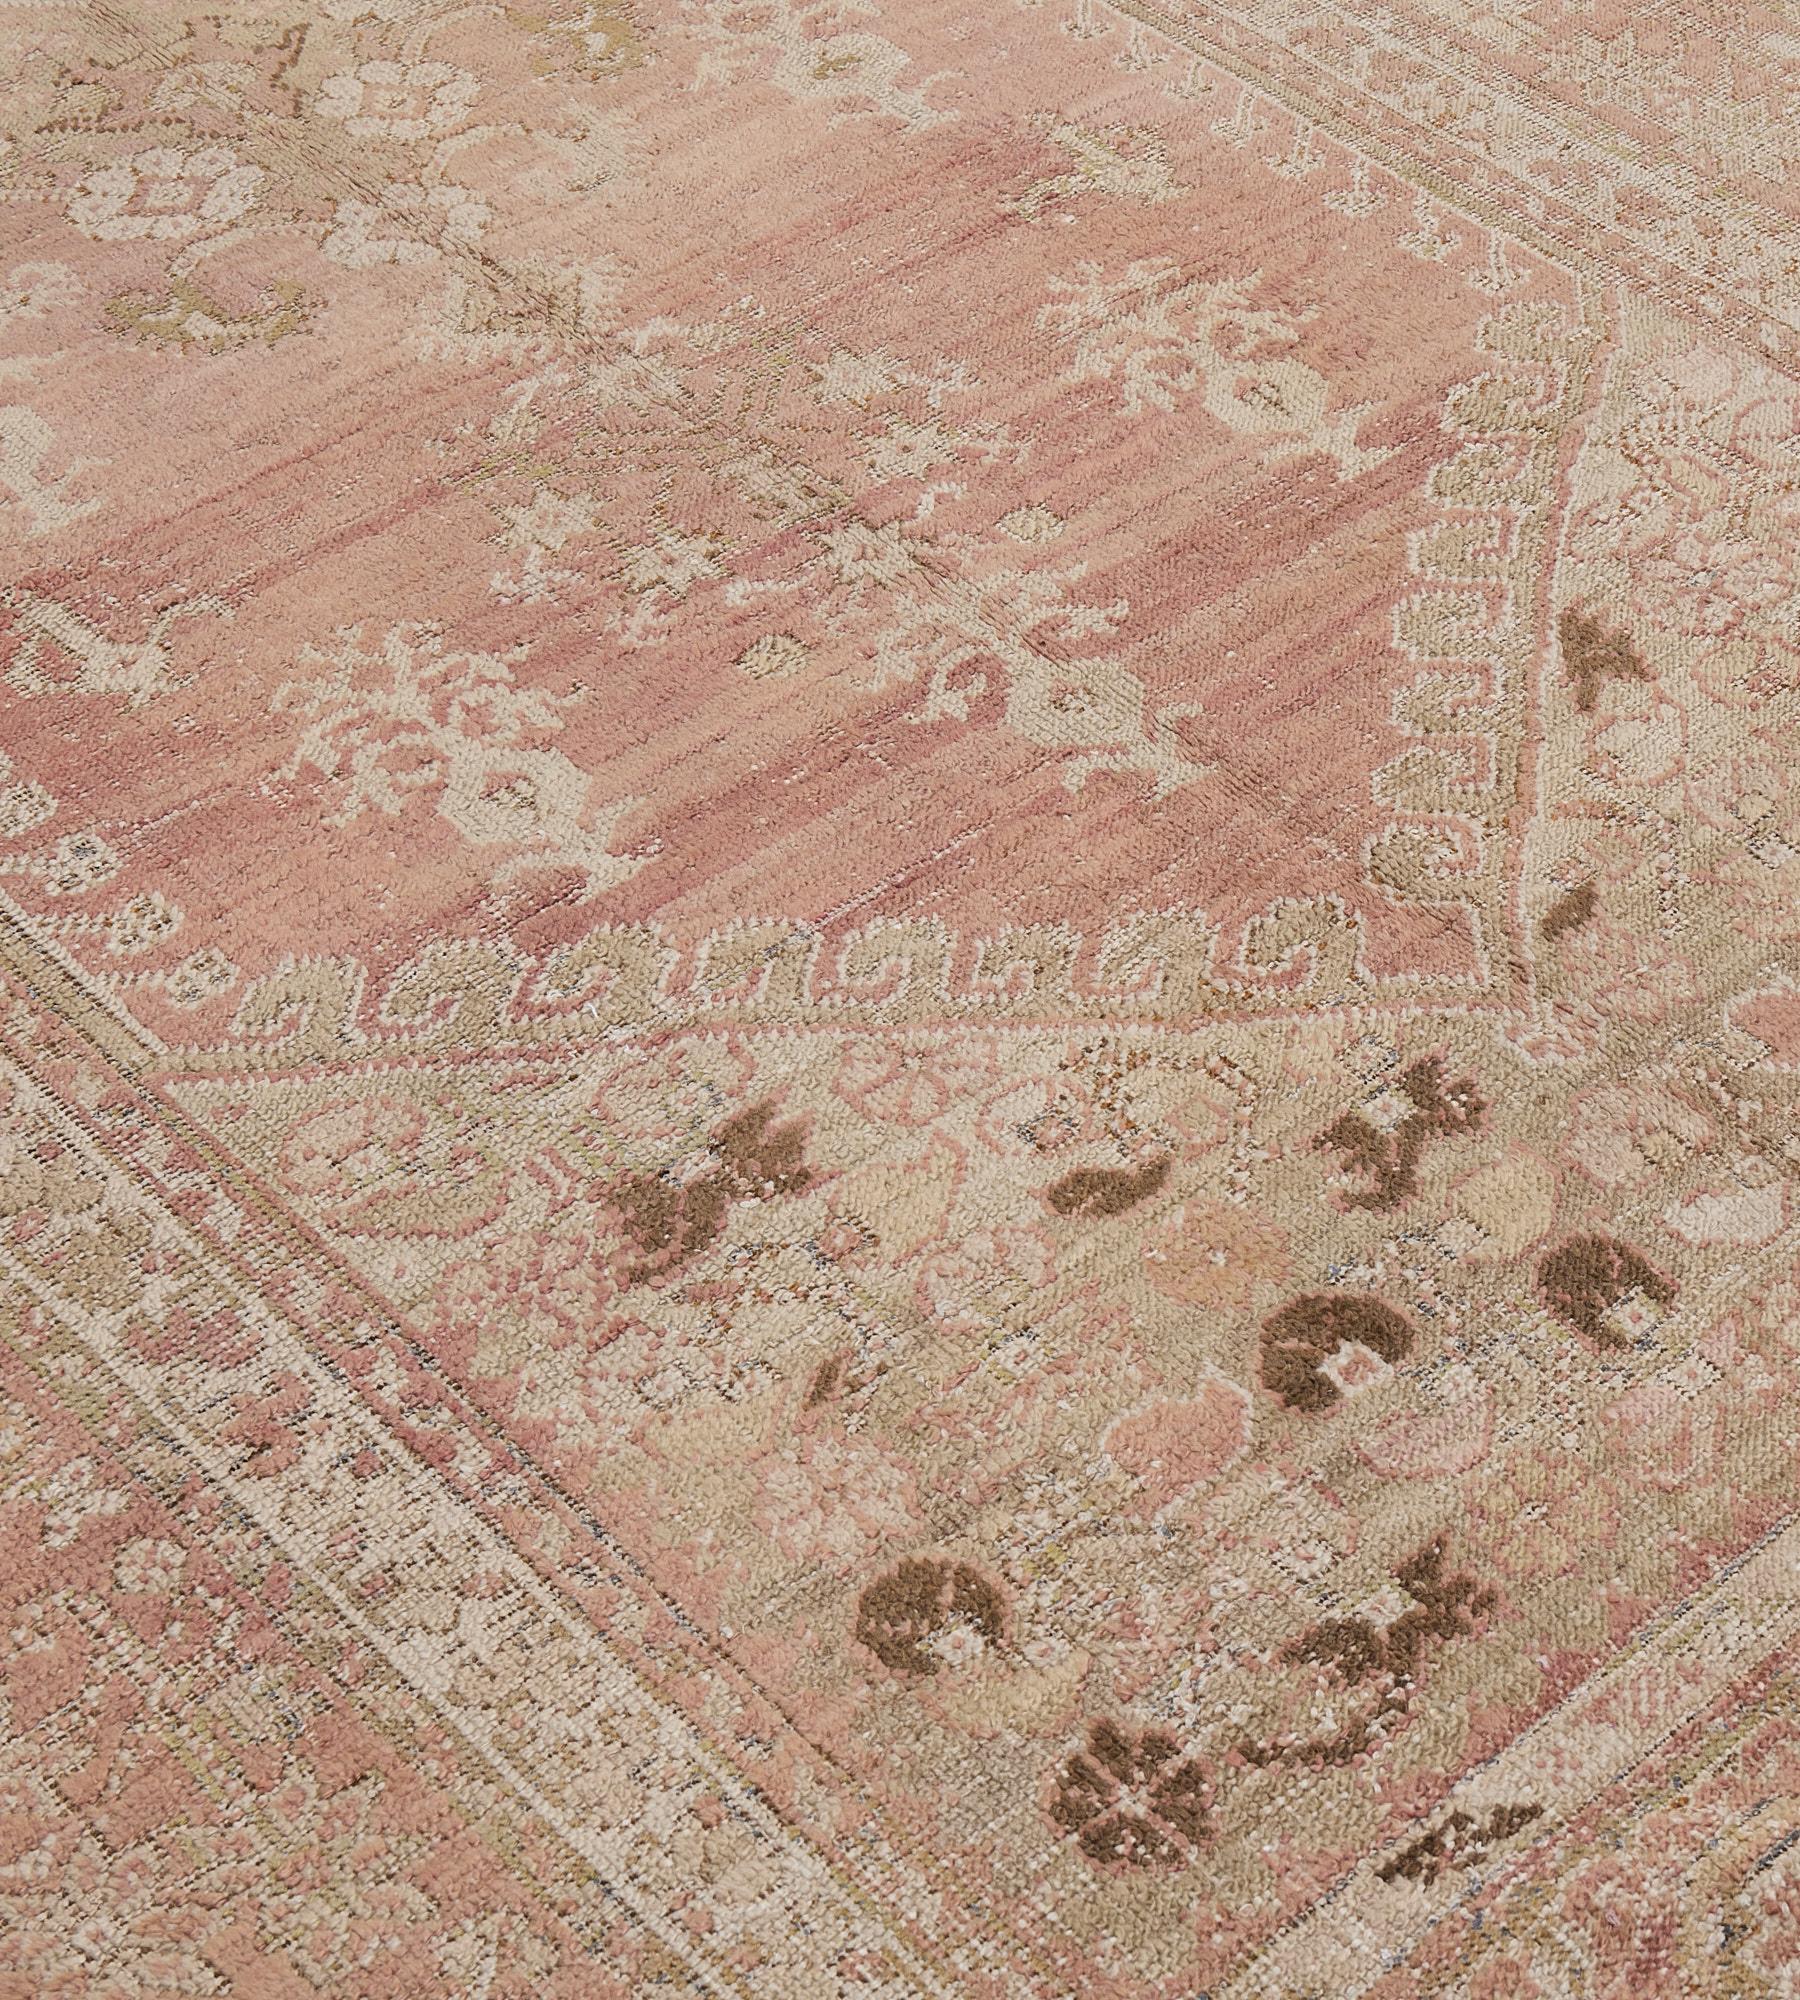 This antique, circa 1880, Ghordes rug has a light salmon-pink field with a central with a central cruciform open lozenge surrounded by a variety of floral motifs and an outer band of ivory rosettes with flowering vases above and below, the light